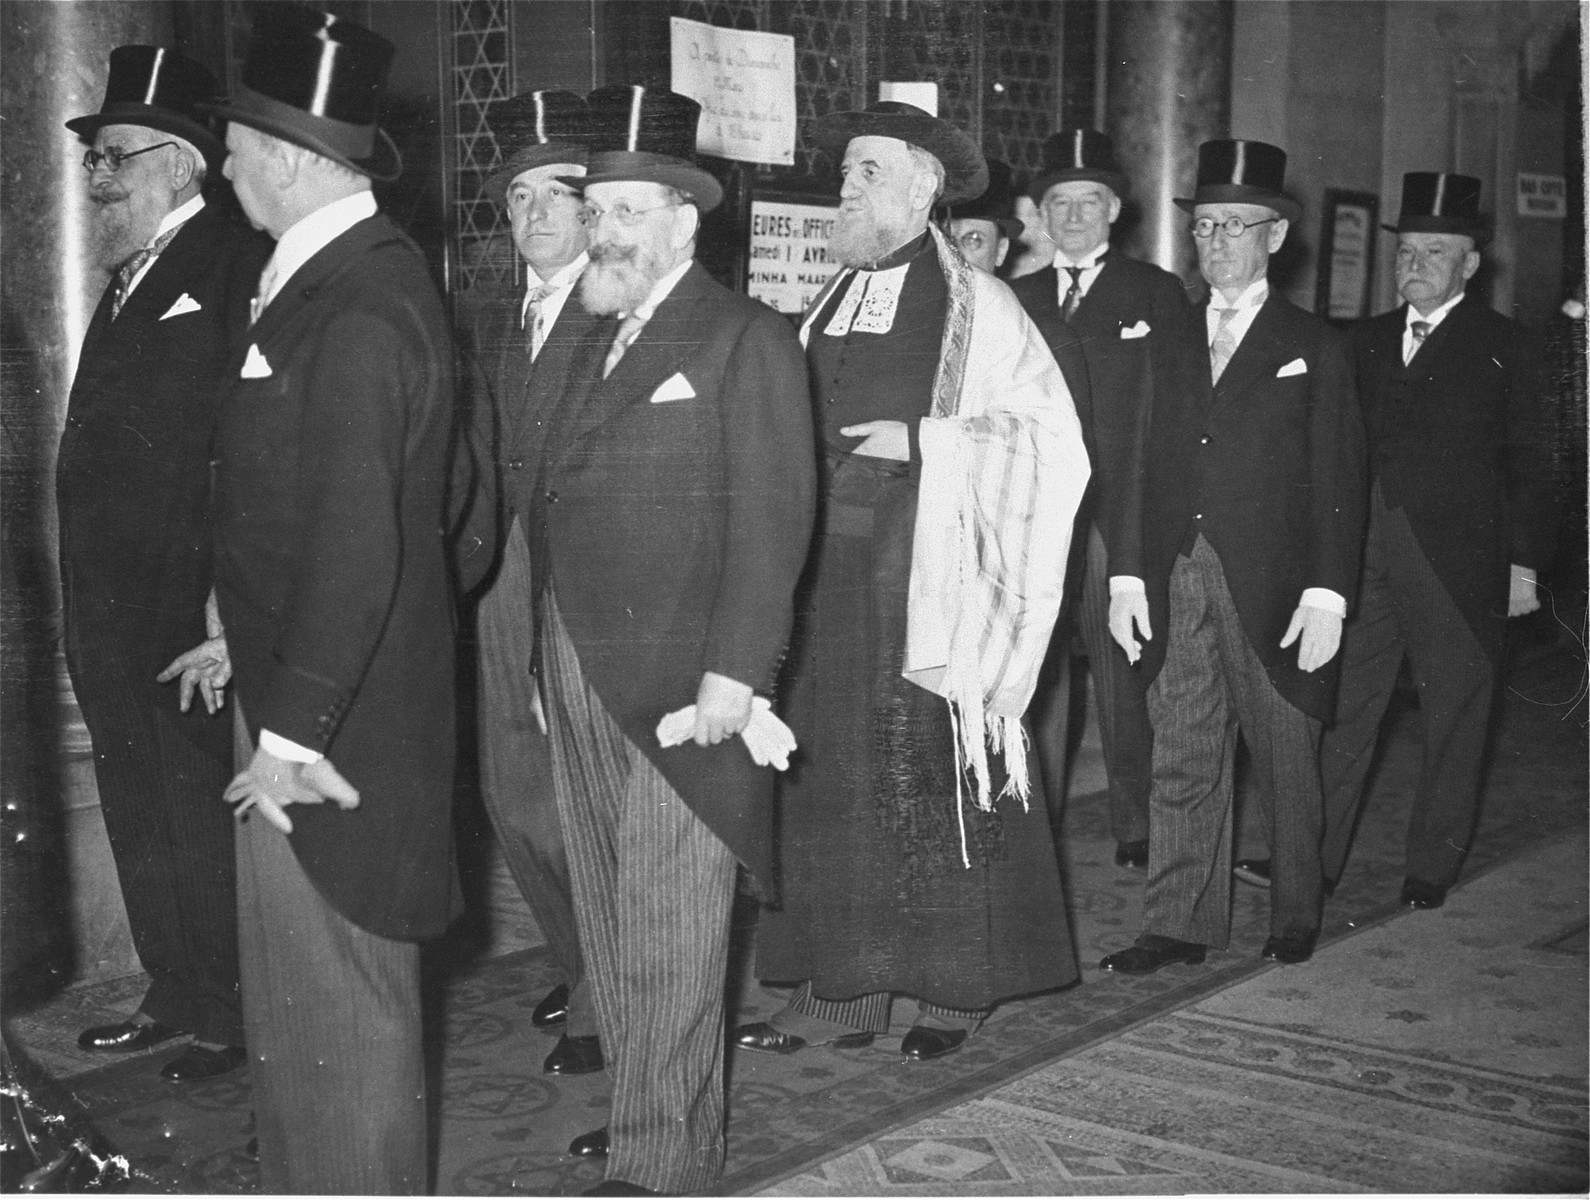 Rabbi Isaie Schwartz is escorted by leaders of the Jewish community to the synagogue where he will be installed as the new Chief Rabbi of France.